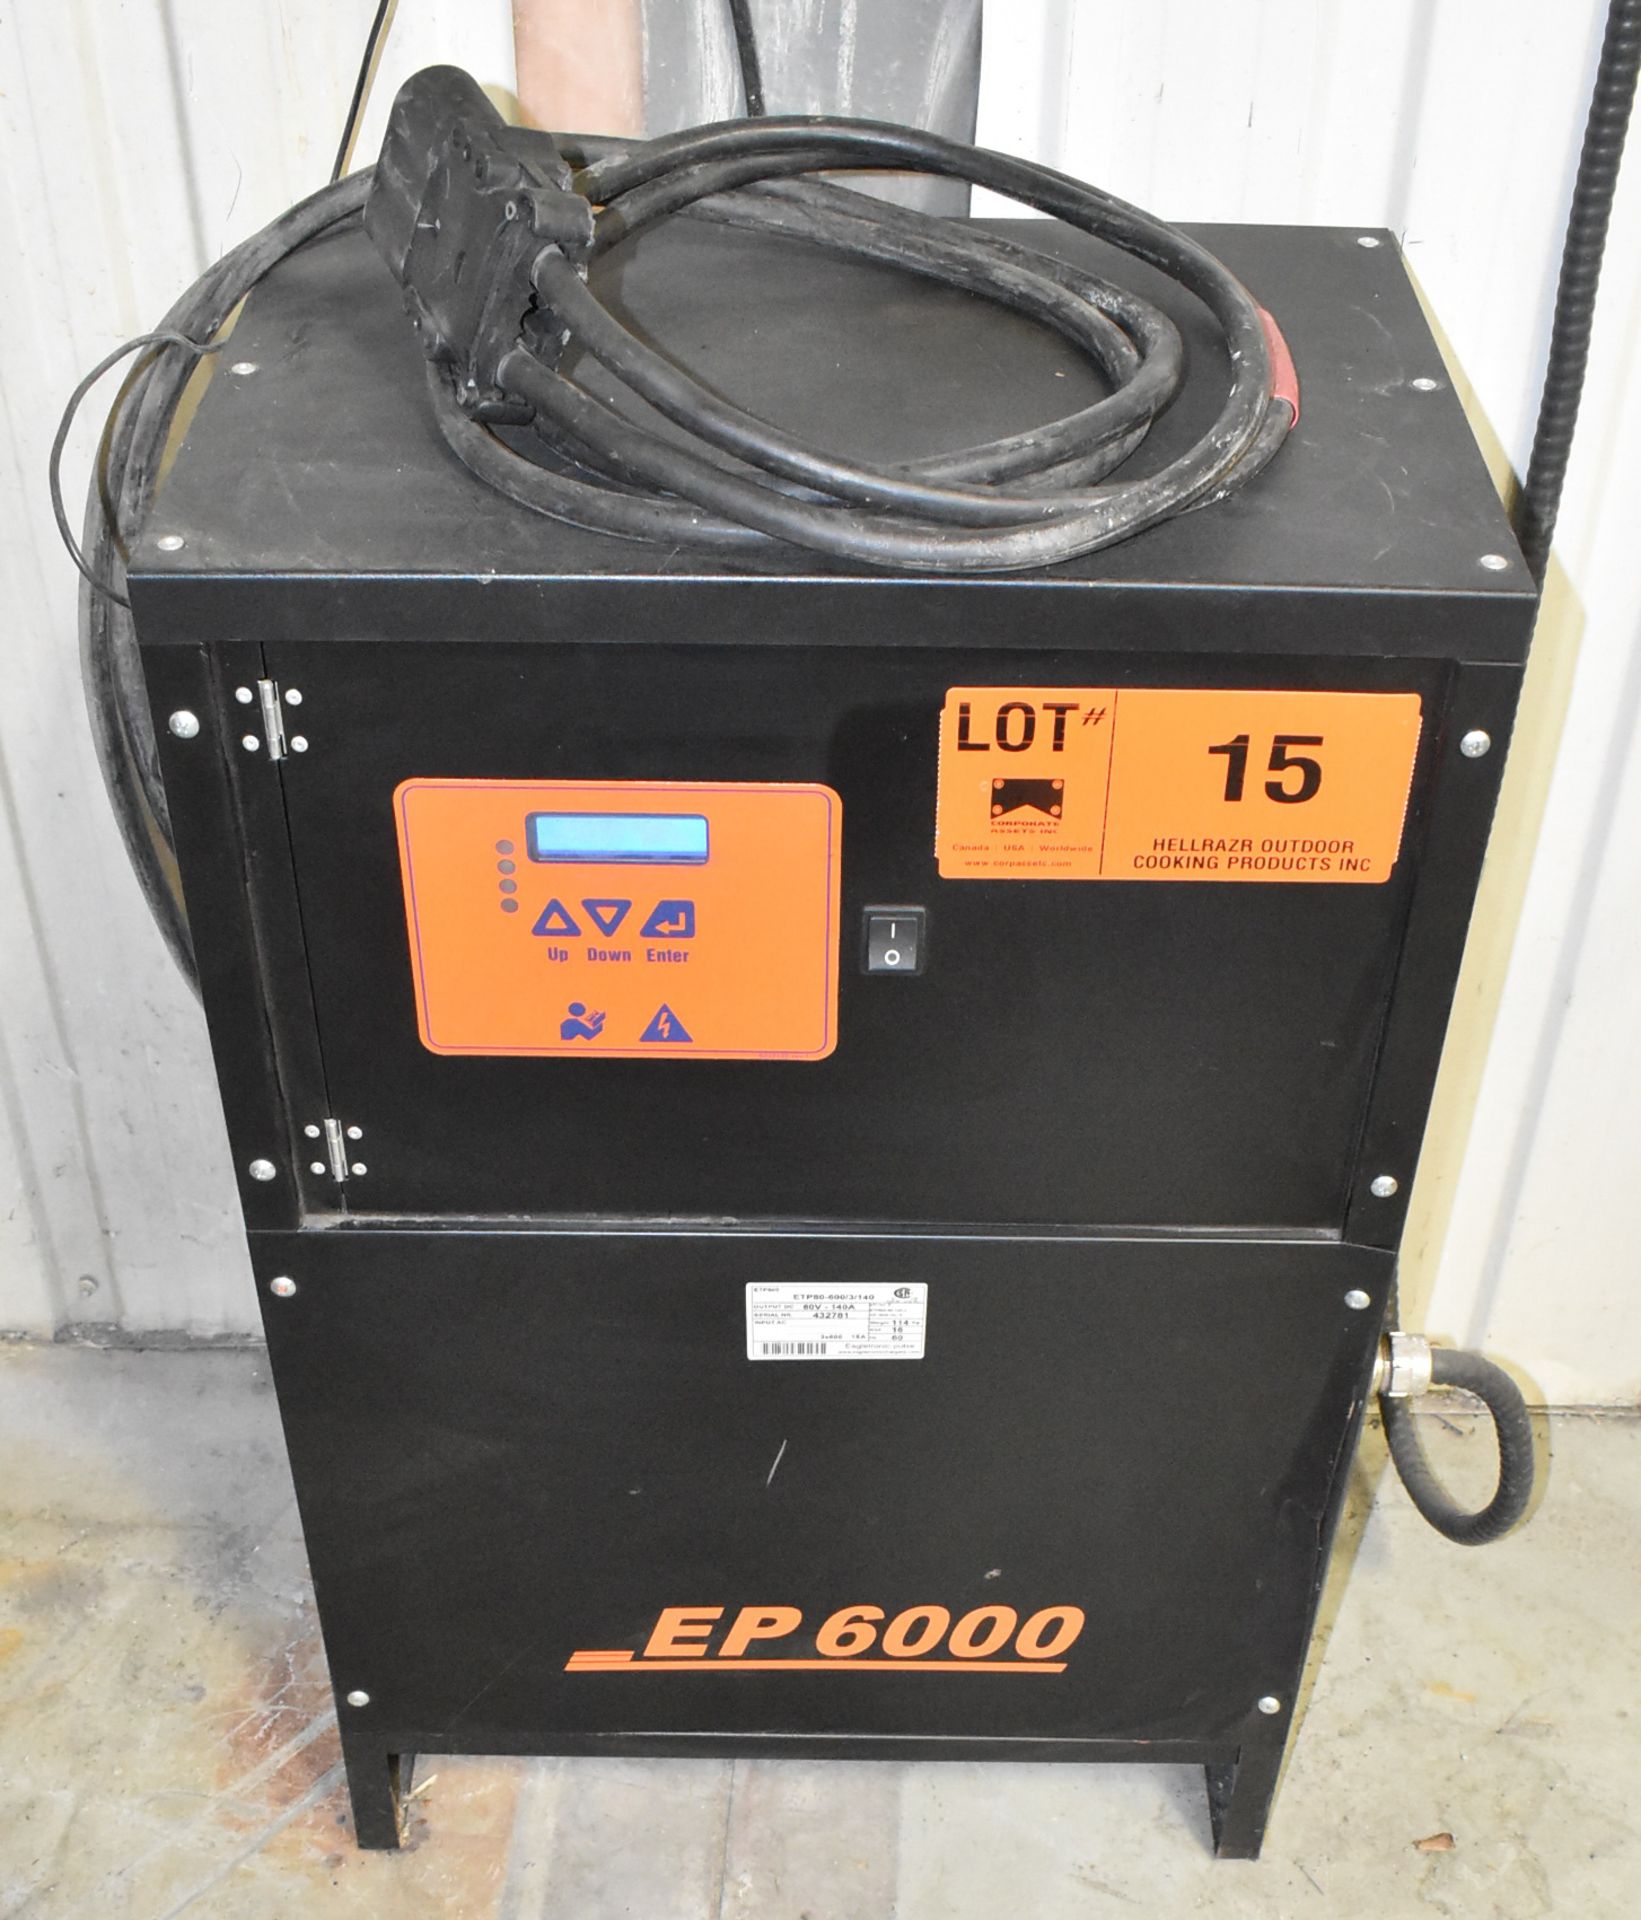 EAGLETRONIC EP6000 80V BATTERY CHARGER WITH 16 KVA/60HZ, S/N: 432781 (CI) (DELAYED DELIVERY) [